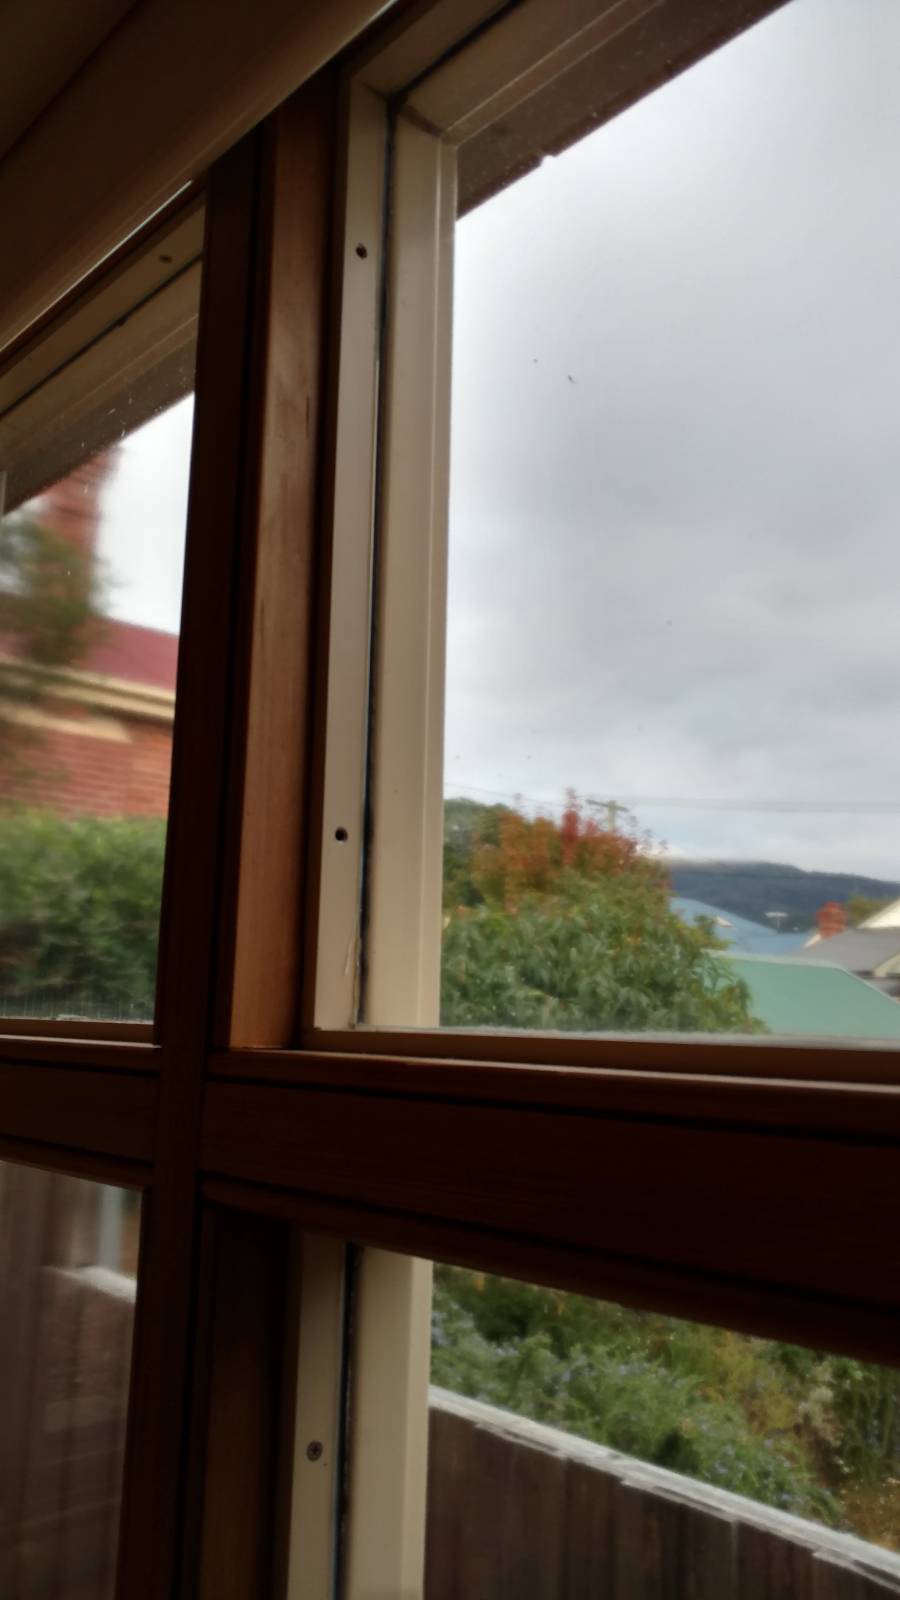 Advice on how to remove glass from this window please